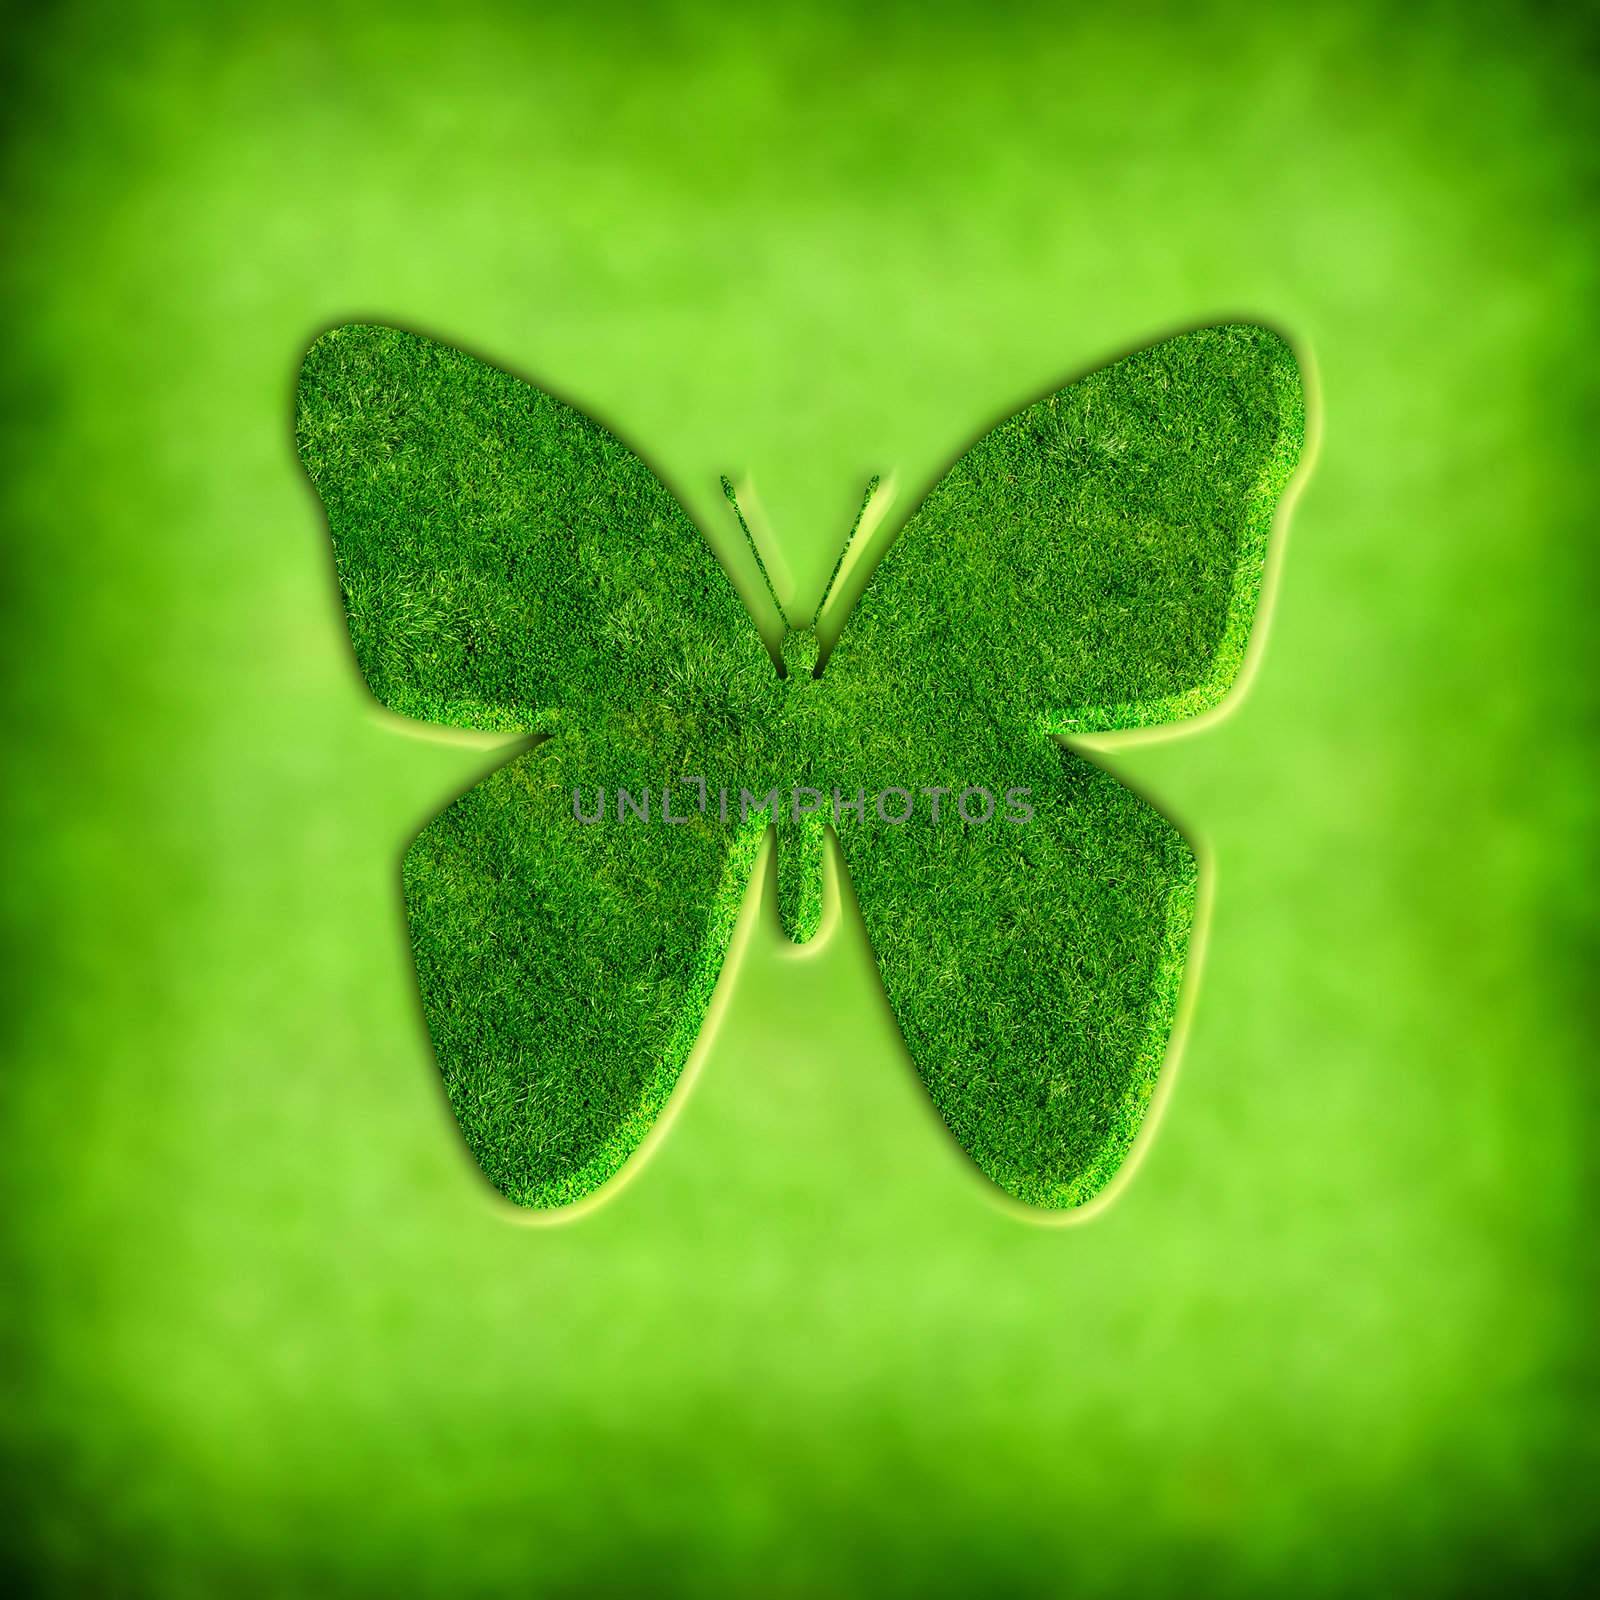 spring background with butterfly illustration - square format